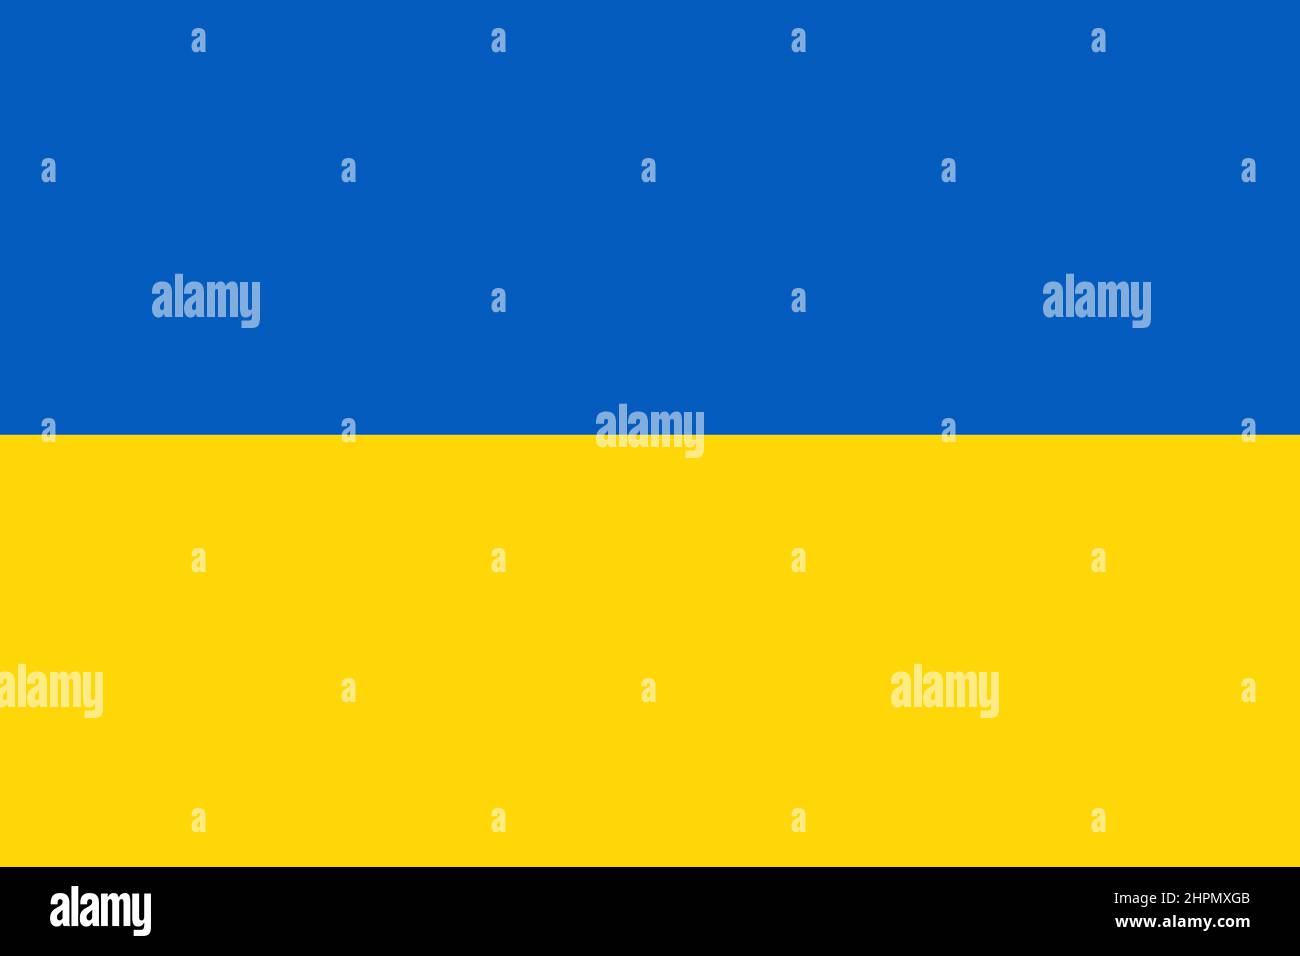 Ukraine blue and yellow bicolor flag illustration suitable for banner or background. Ukrainian national flag image Stock Photo